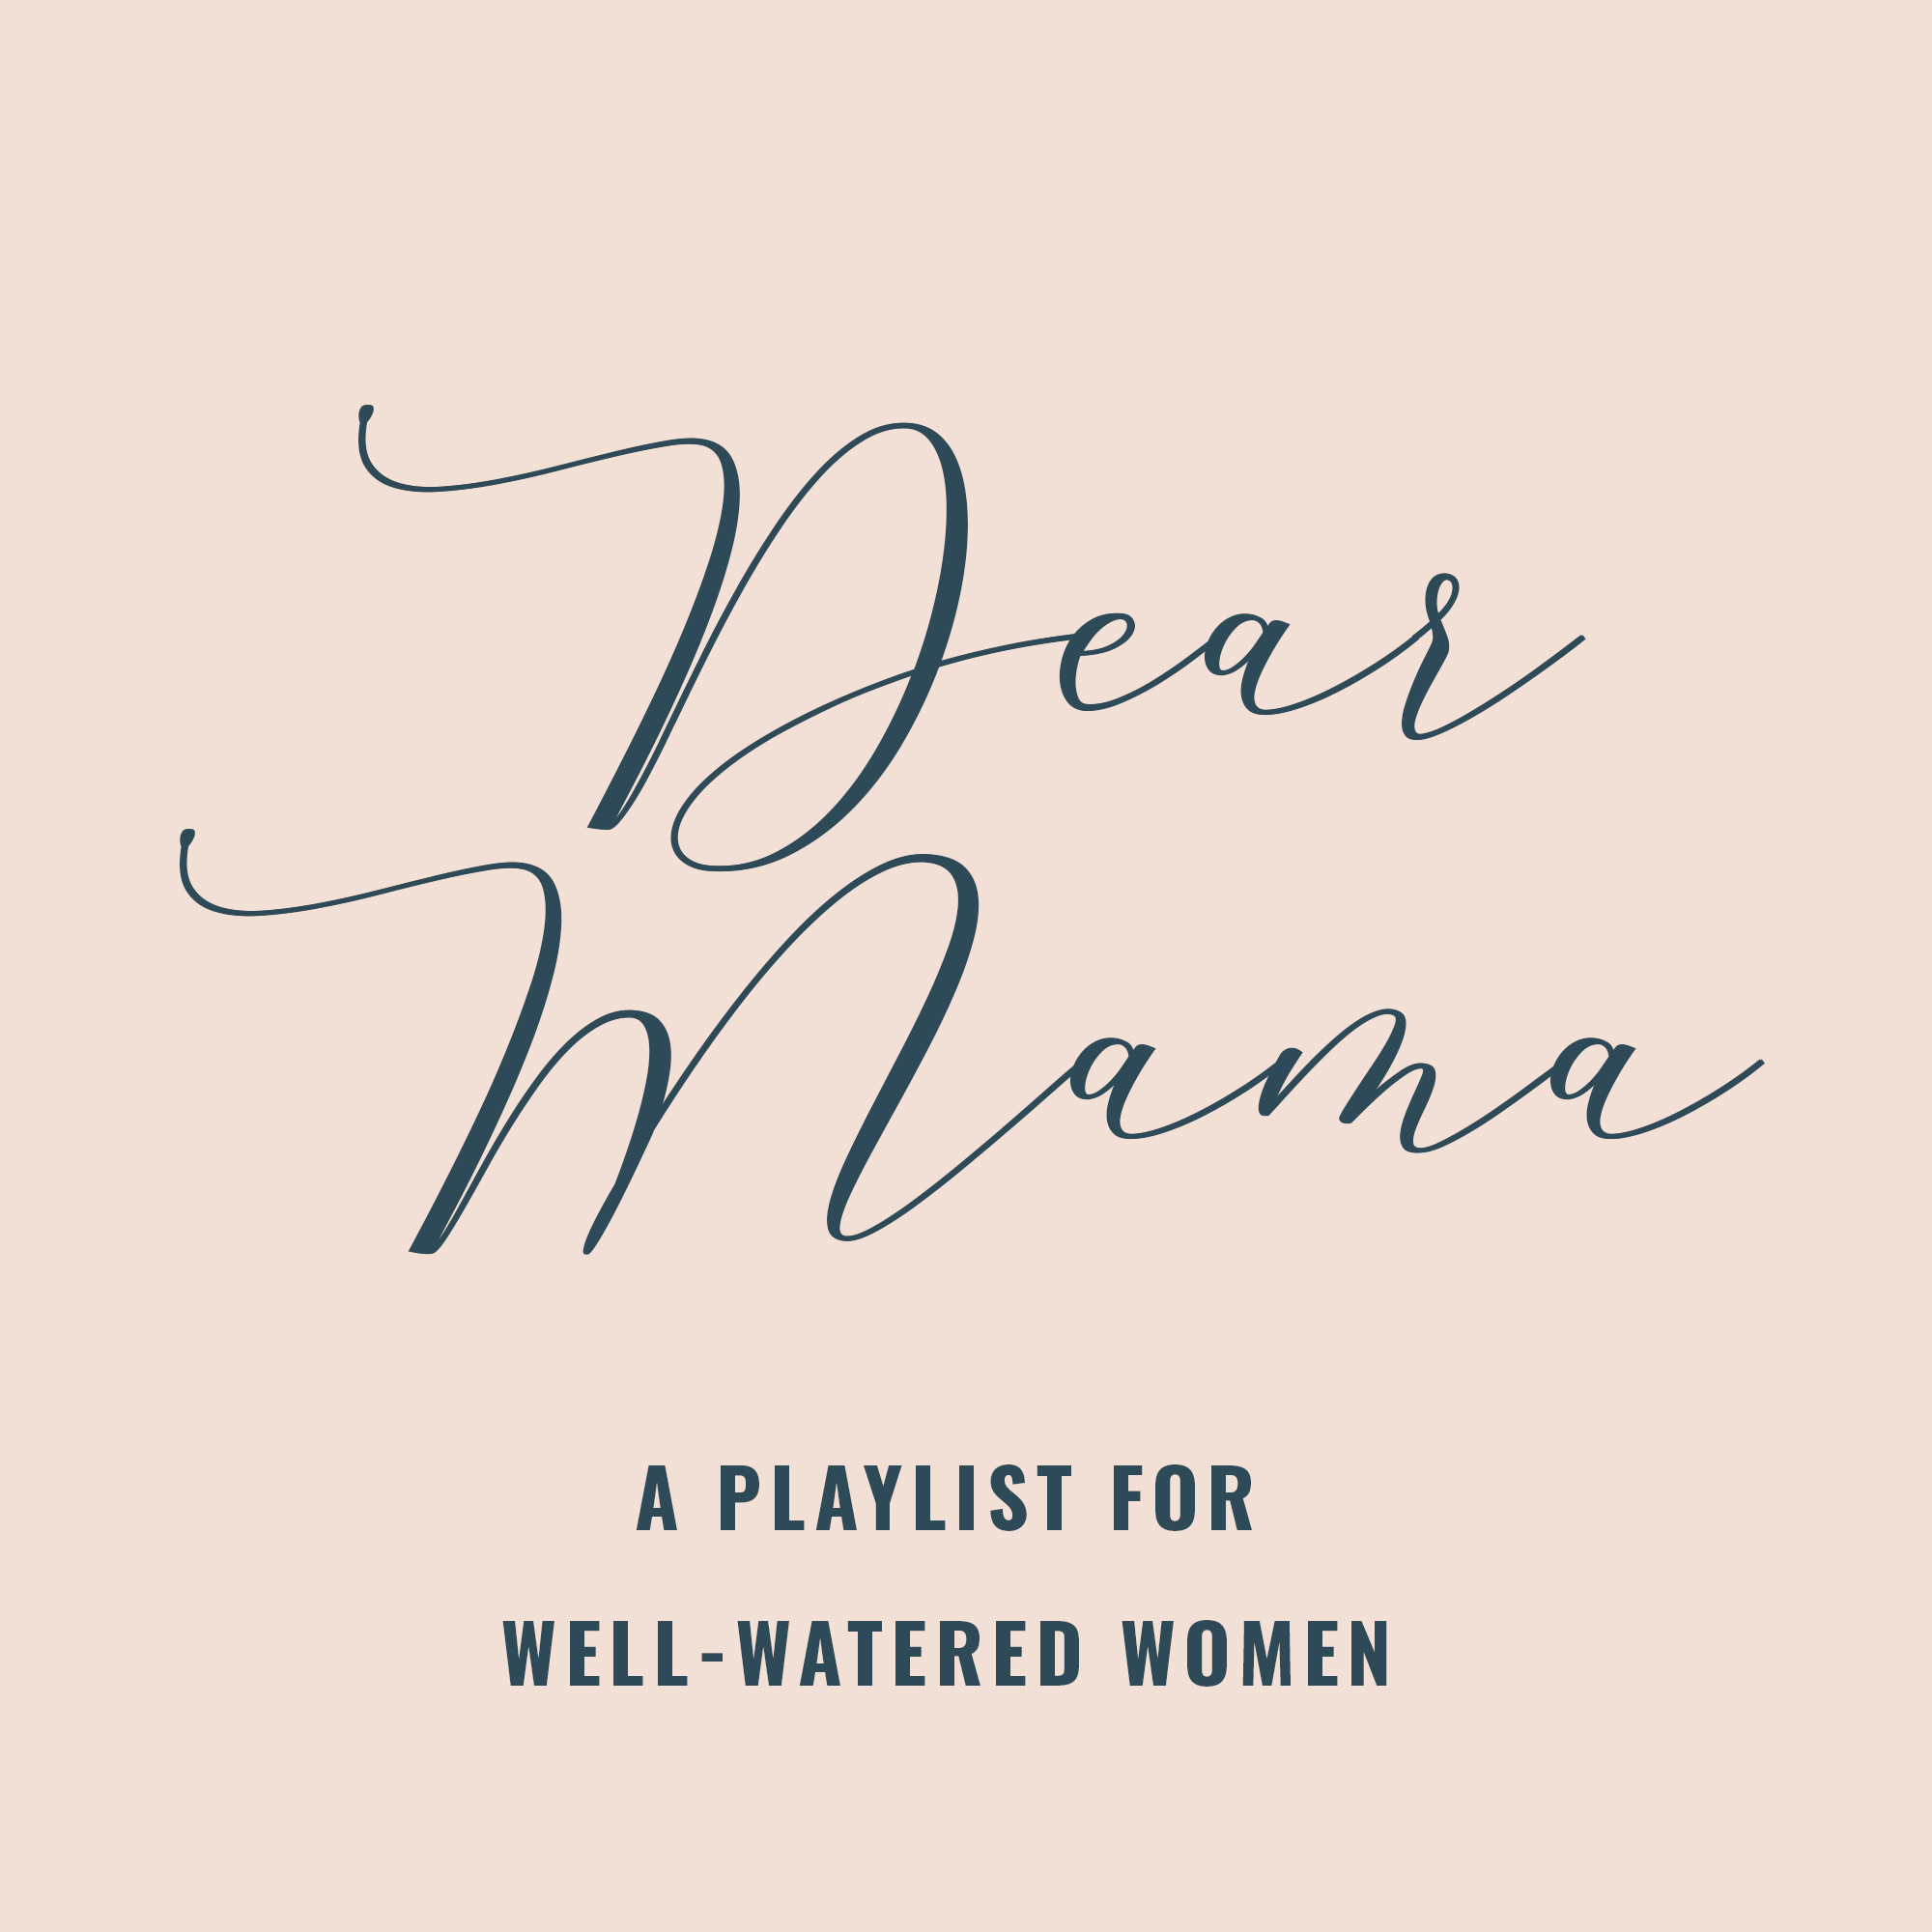 Listen to this playlist we've curated with mamas in mind!